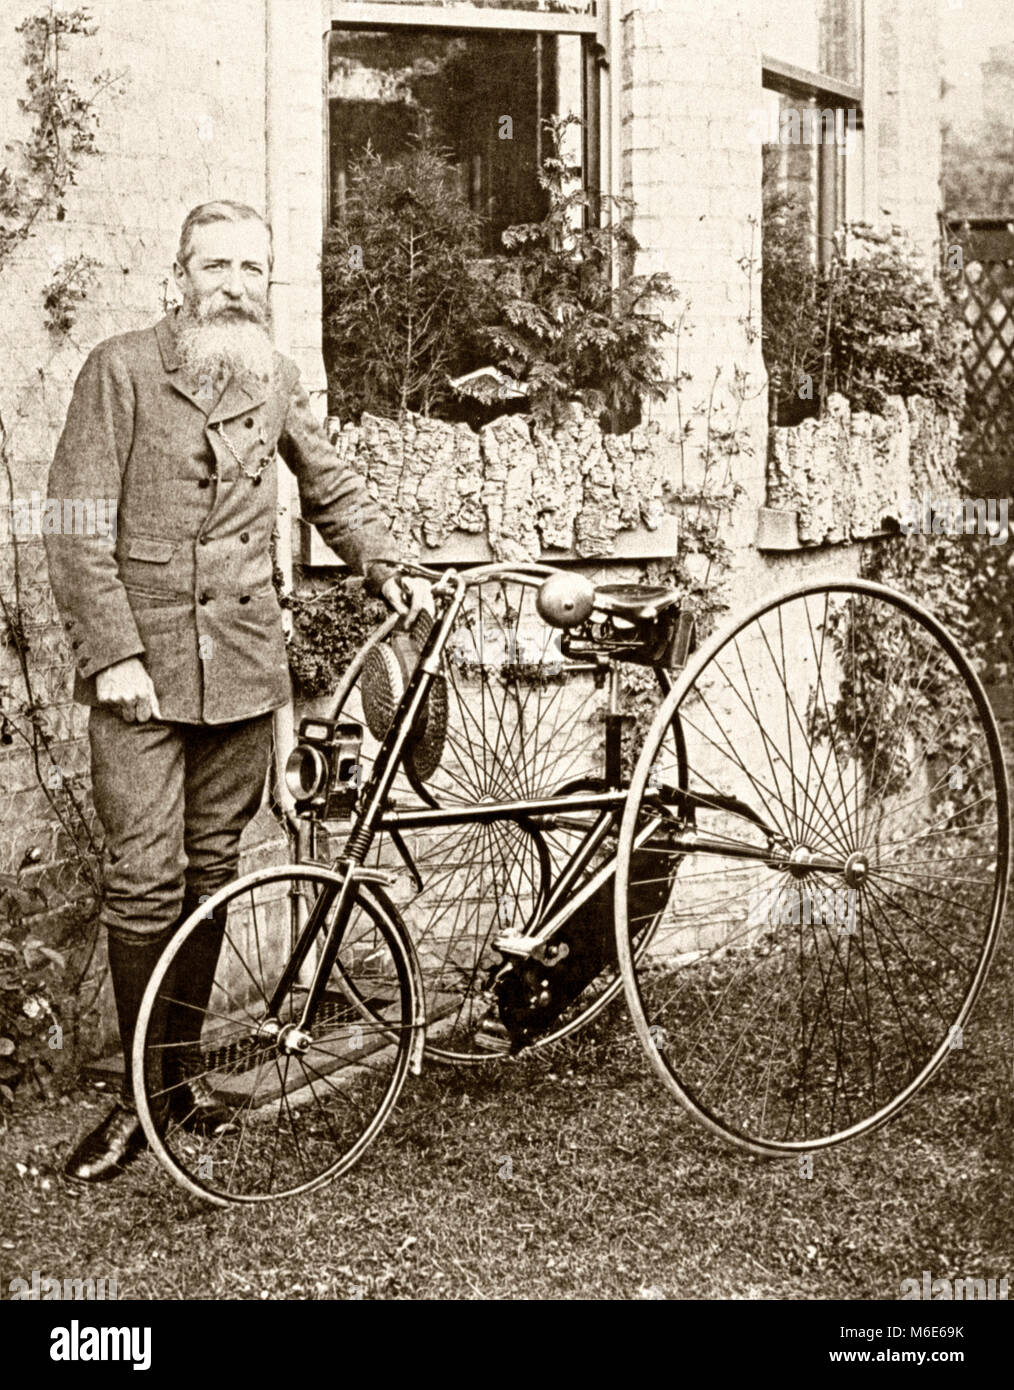 Thomas Humber together with one of his company's tricycles c. 1900. Thomas Humber (1841–1910) was a British engineer and cycle manufacturer and founded Humber Cycles. The three wheeler had two rear large wheels with a much smaller front steering wheel – all had solid rubber tyres Stock Photo